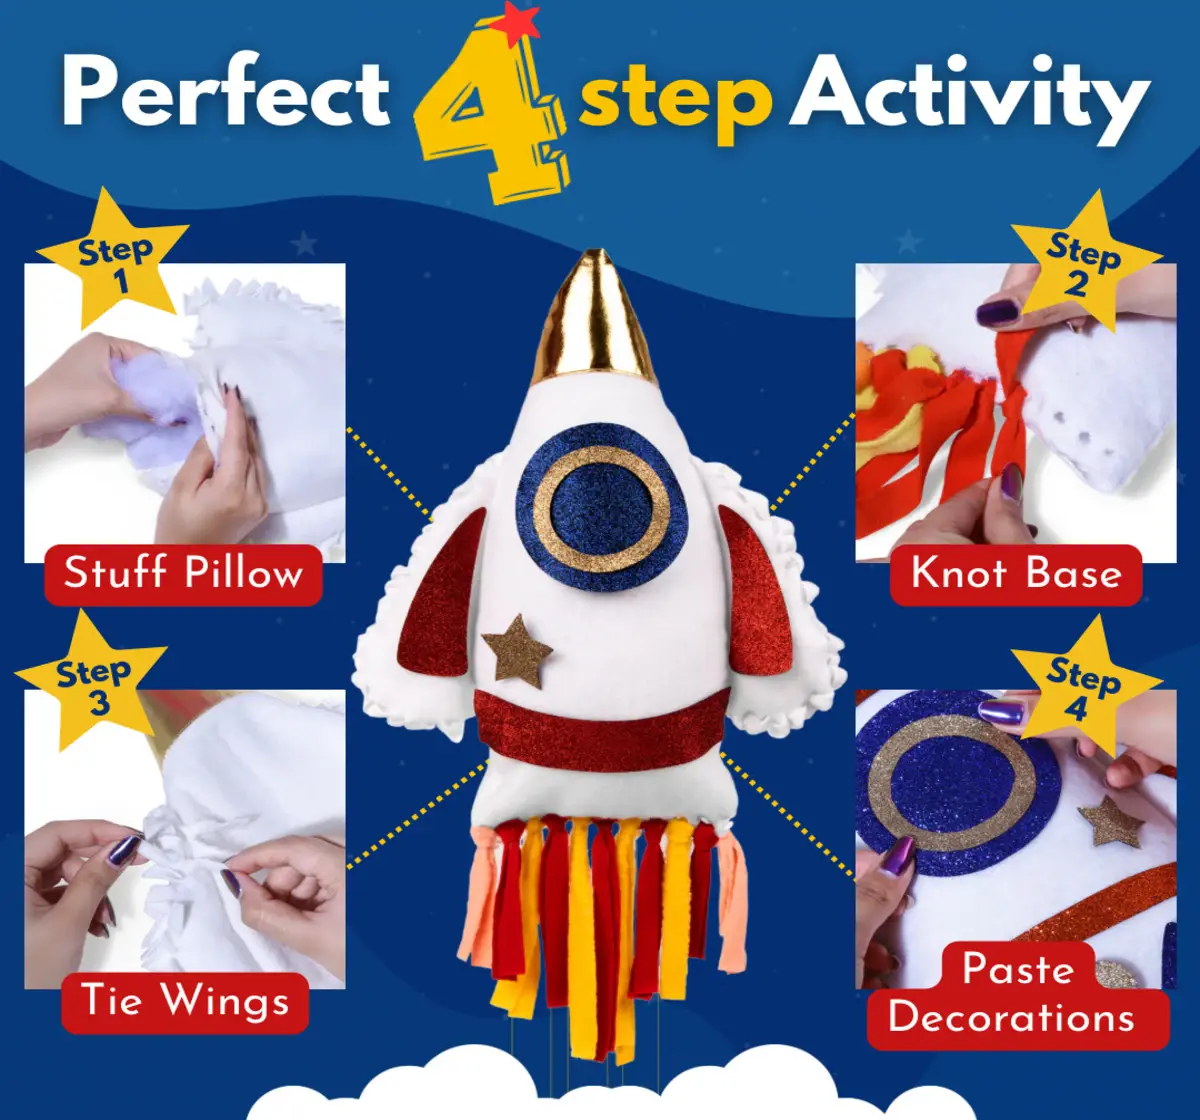 PepPlay Make Your Rocket Pillow DIY Crafts Kit For Kids of Age 6Y+, Multicolour